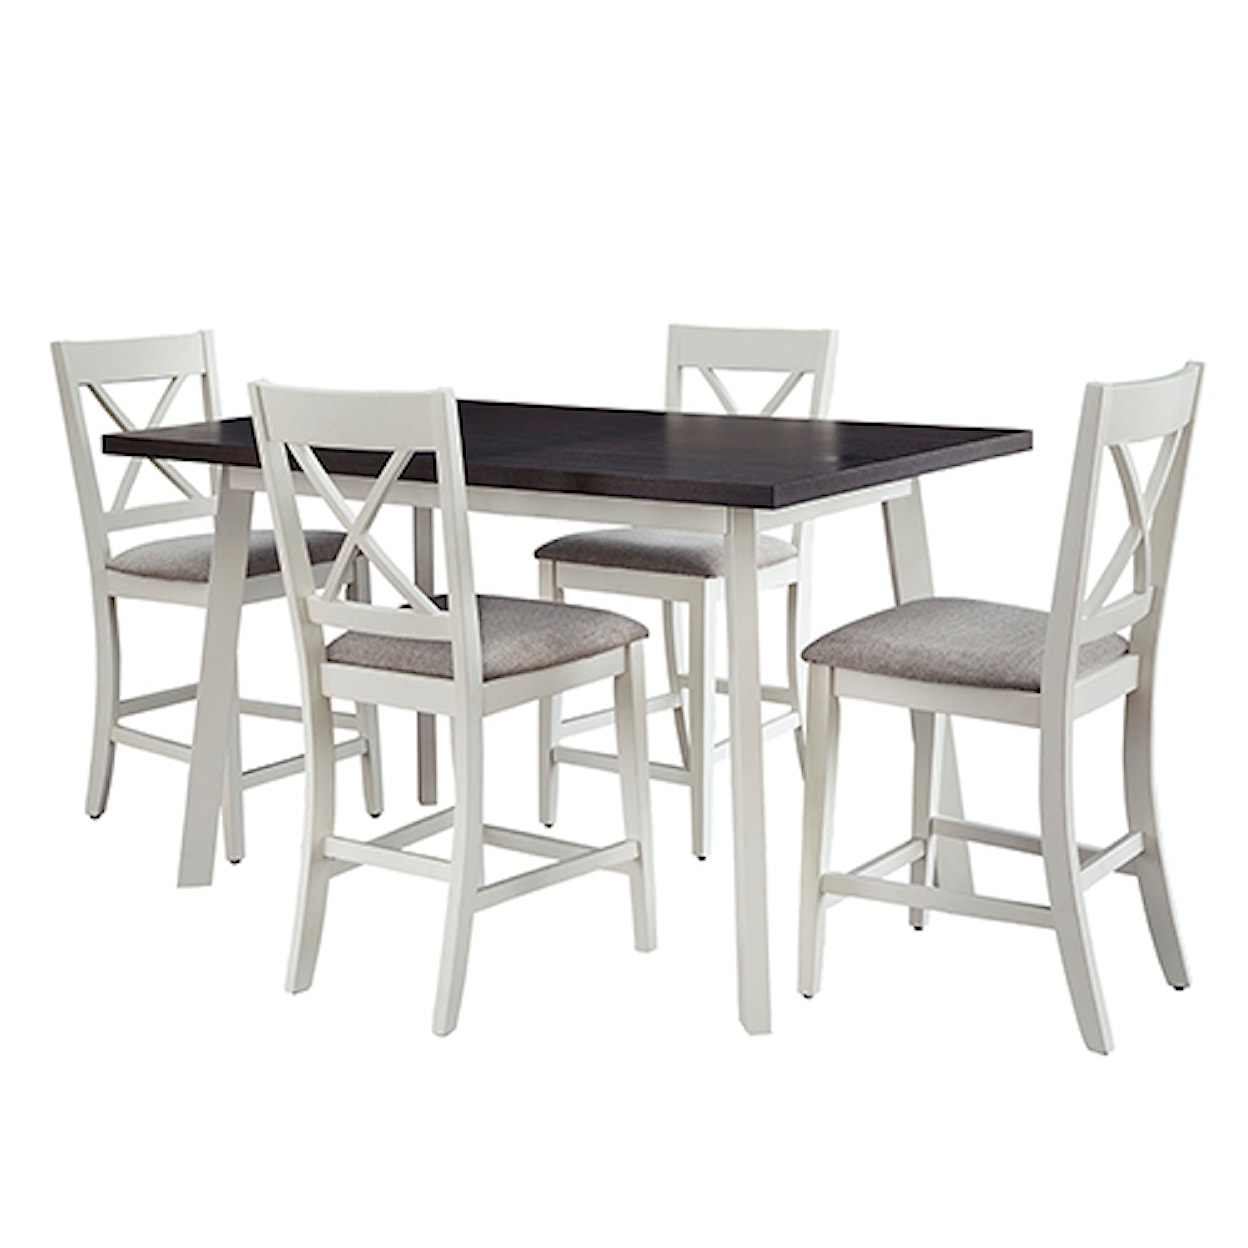 Carolina Chairs Salt & Pepper 5-Piece Counter-Height Table and Chair Set